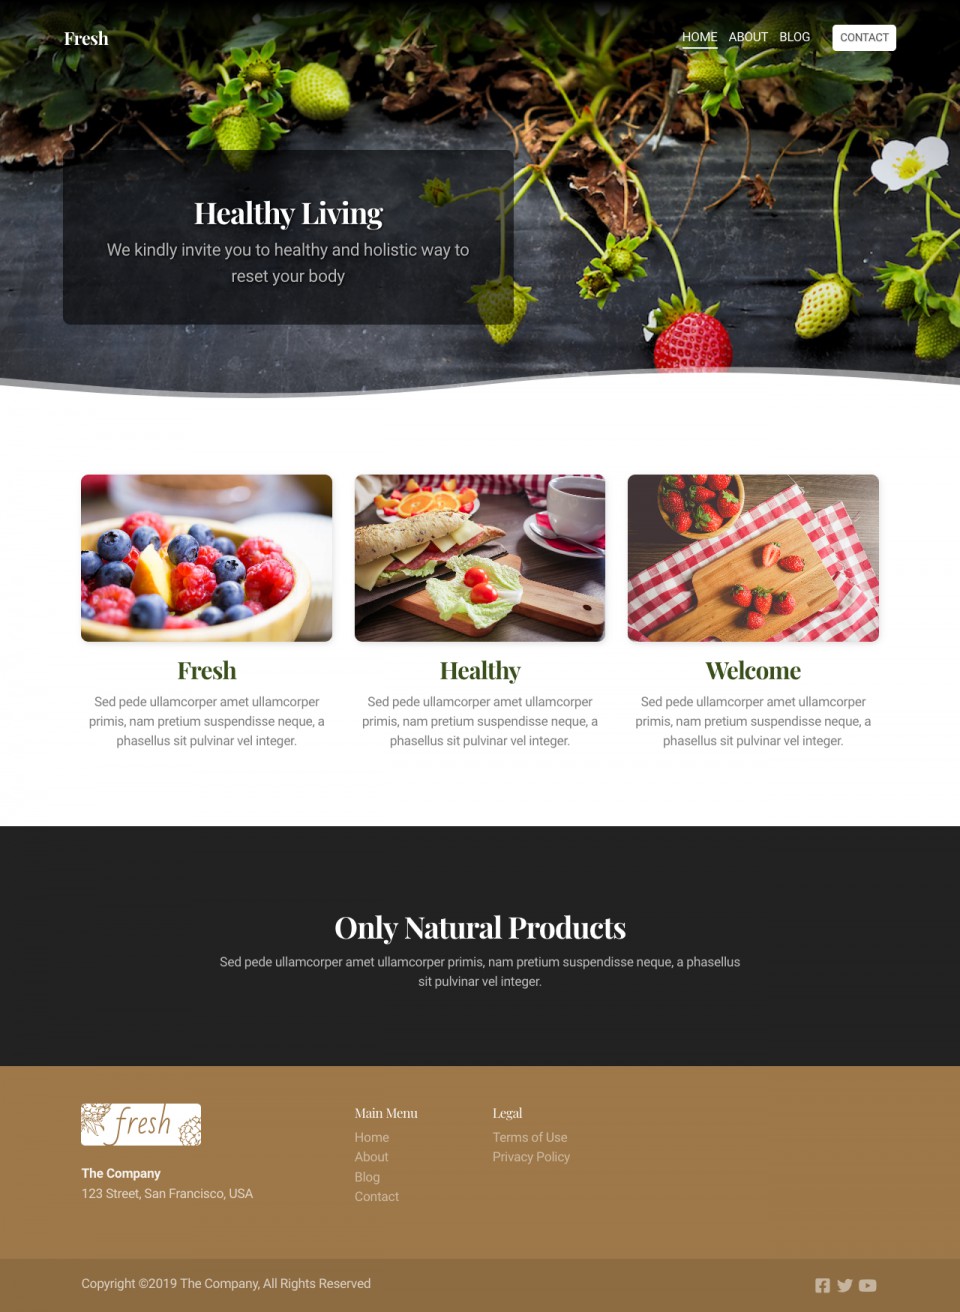 Fresh Website Template - Ideal for small business owners, restaurants, cafes, and food-related businesses.